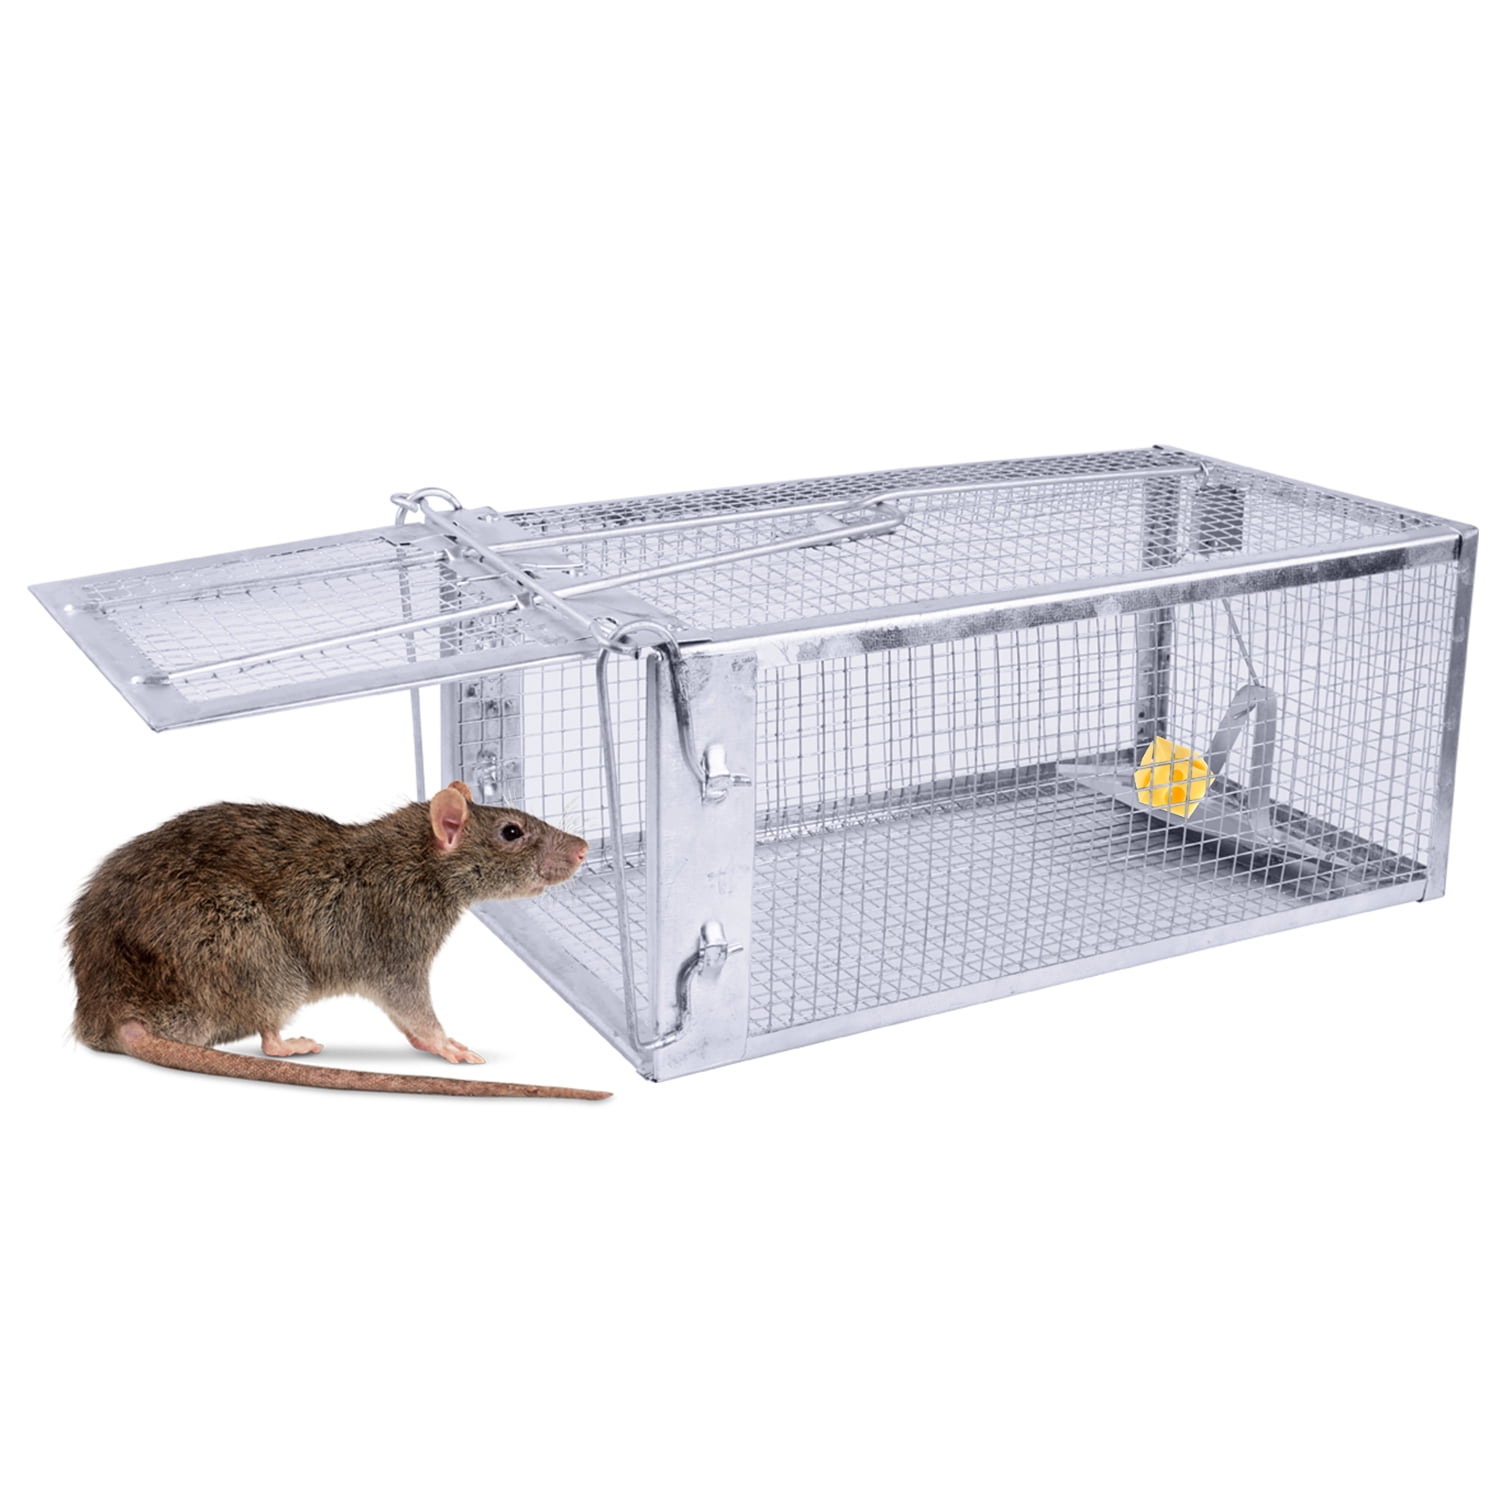 2 Pack Humane Mouse Trap Indoor for Home Live Mouse Trap for House Rat Trap  Indoor Outdoor Catch Release Reusable Easy to use, Trap for Small Animal,  Pet Safe ( 10.6x 5.6x